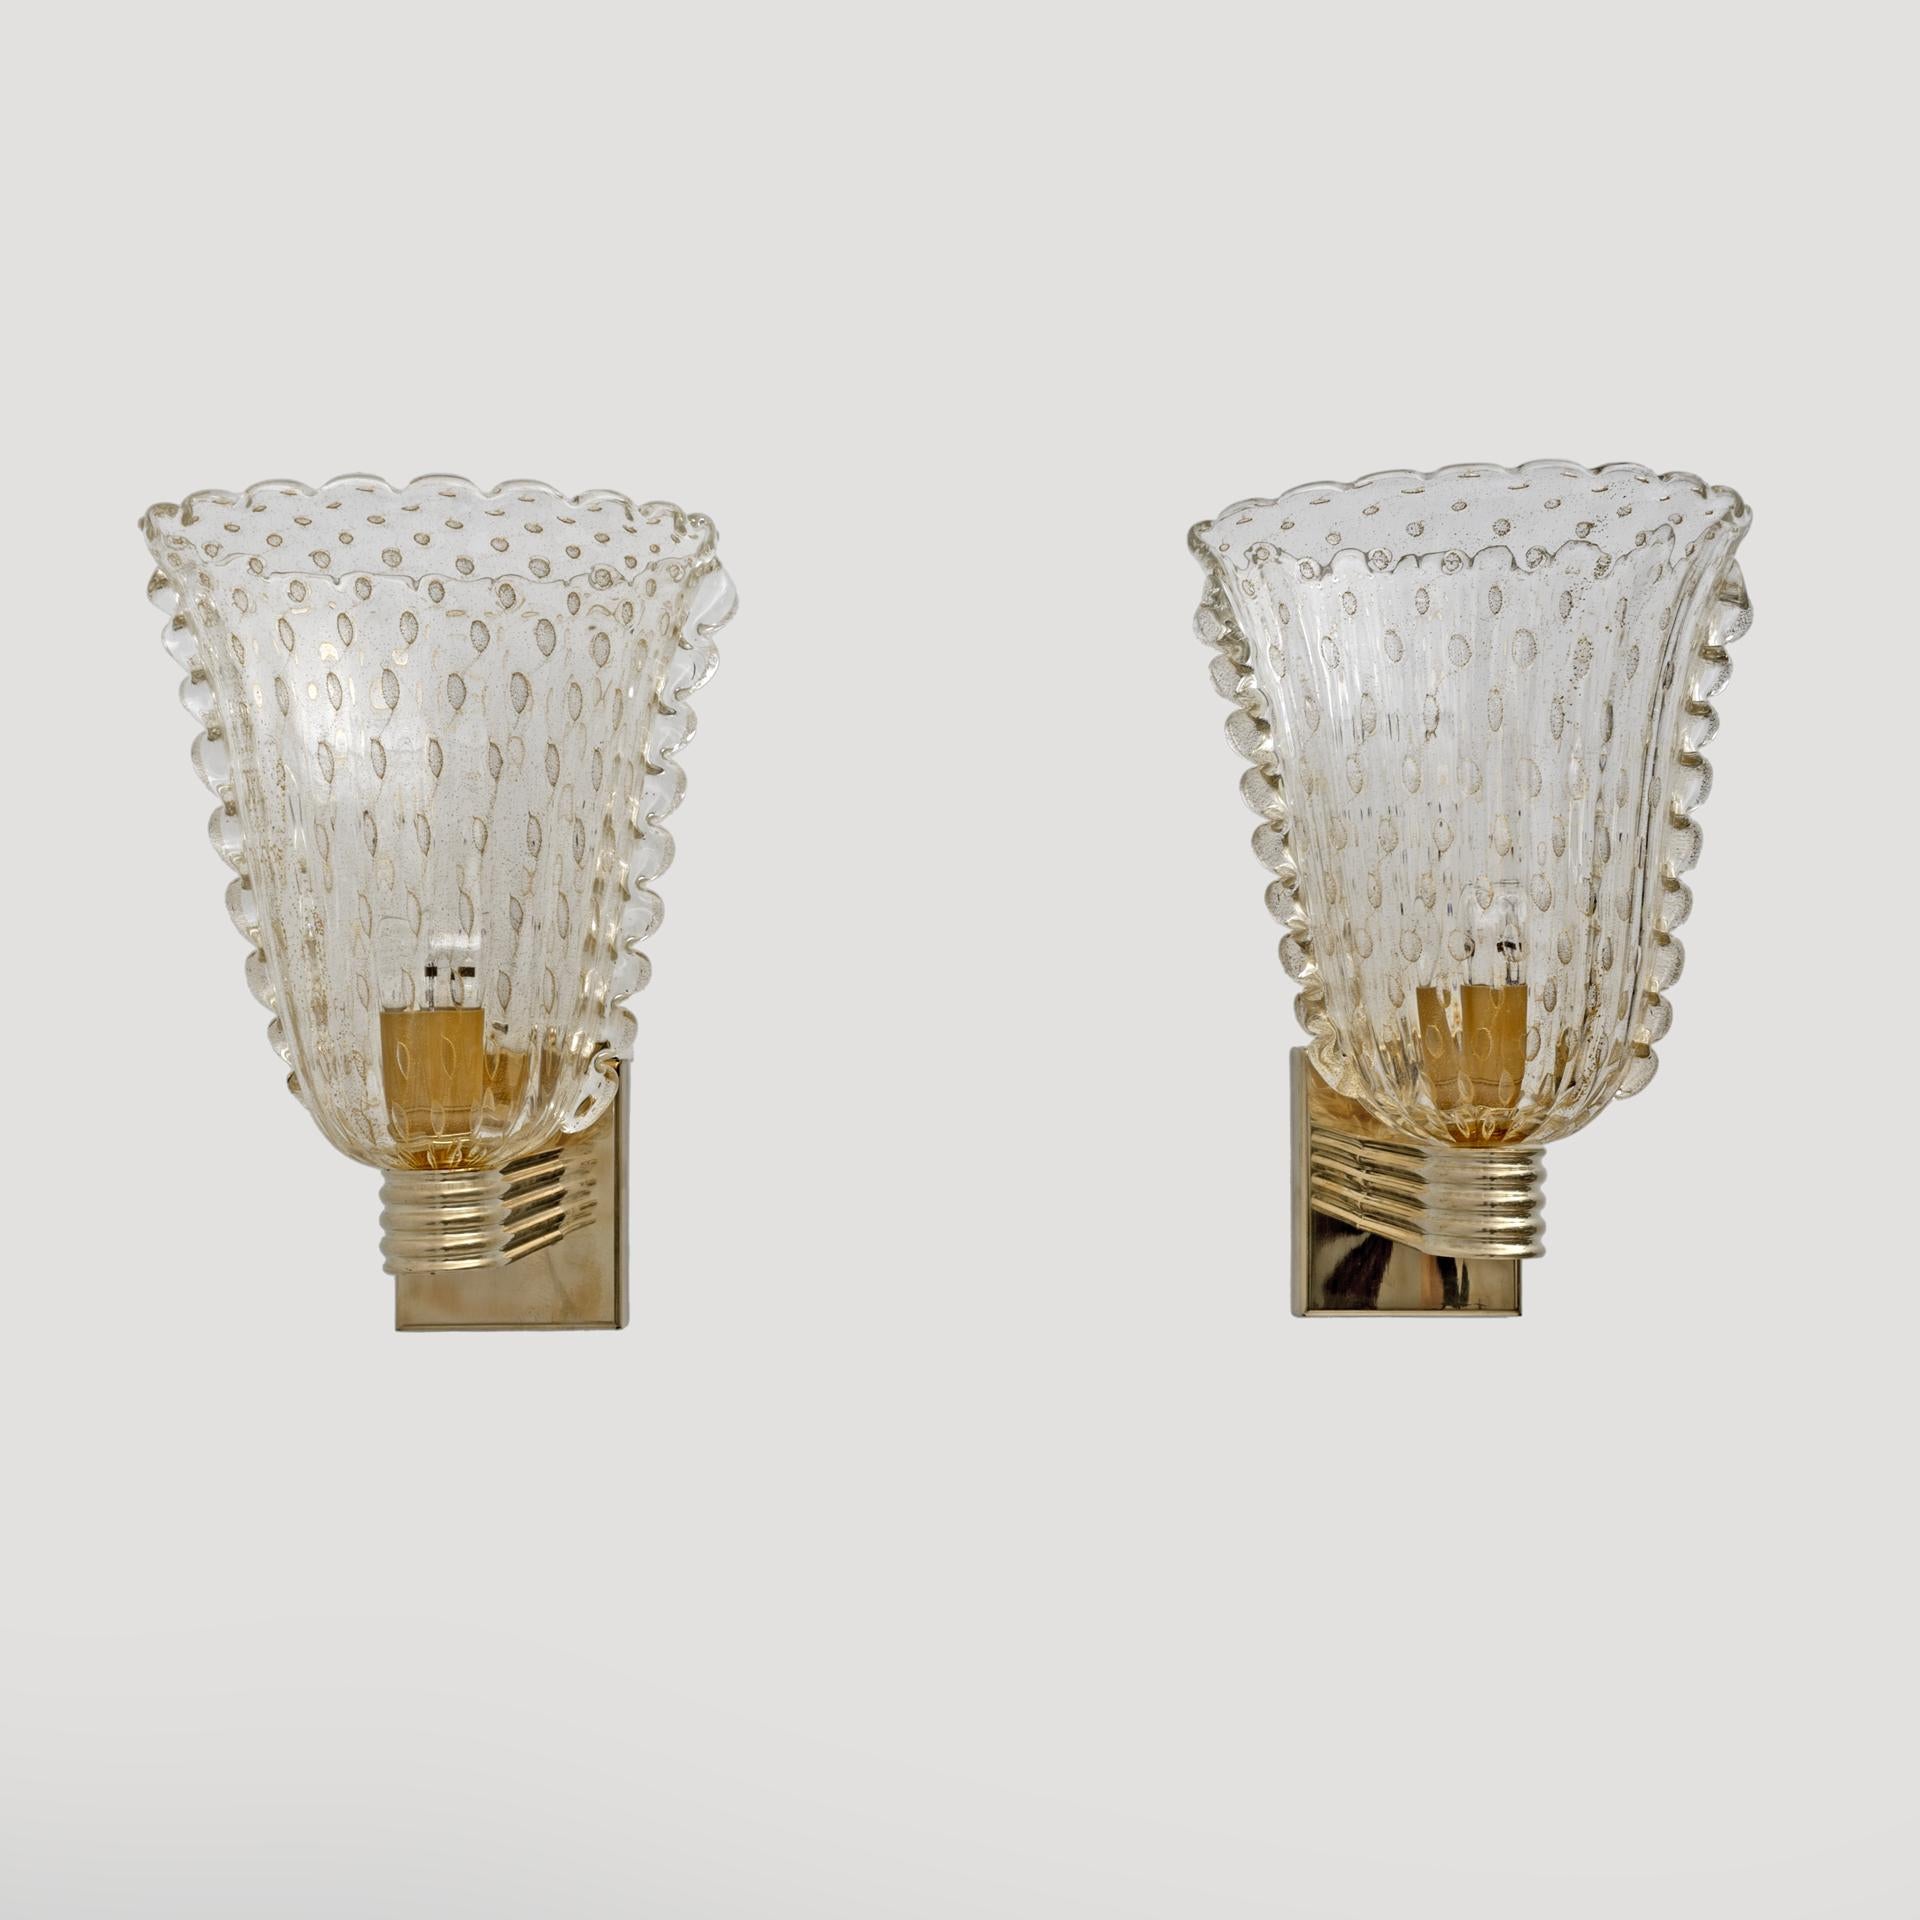 This fabulous pair of Art Deco style Murano glass sconces was made entirely by hand. It is all decorated with the Pulegoso technique. This means it has large air bubbles inside the high-quality blown glass, crafted with 24-karat gold dust